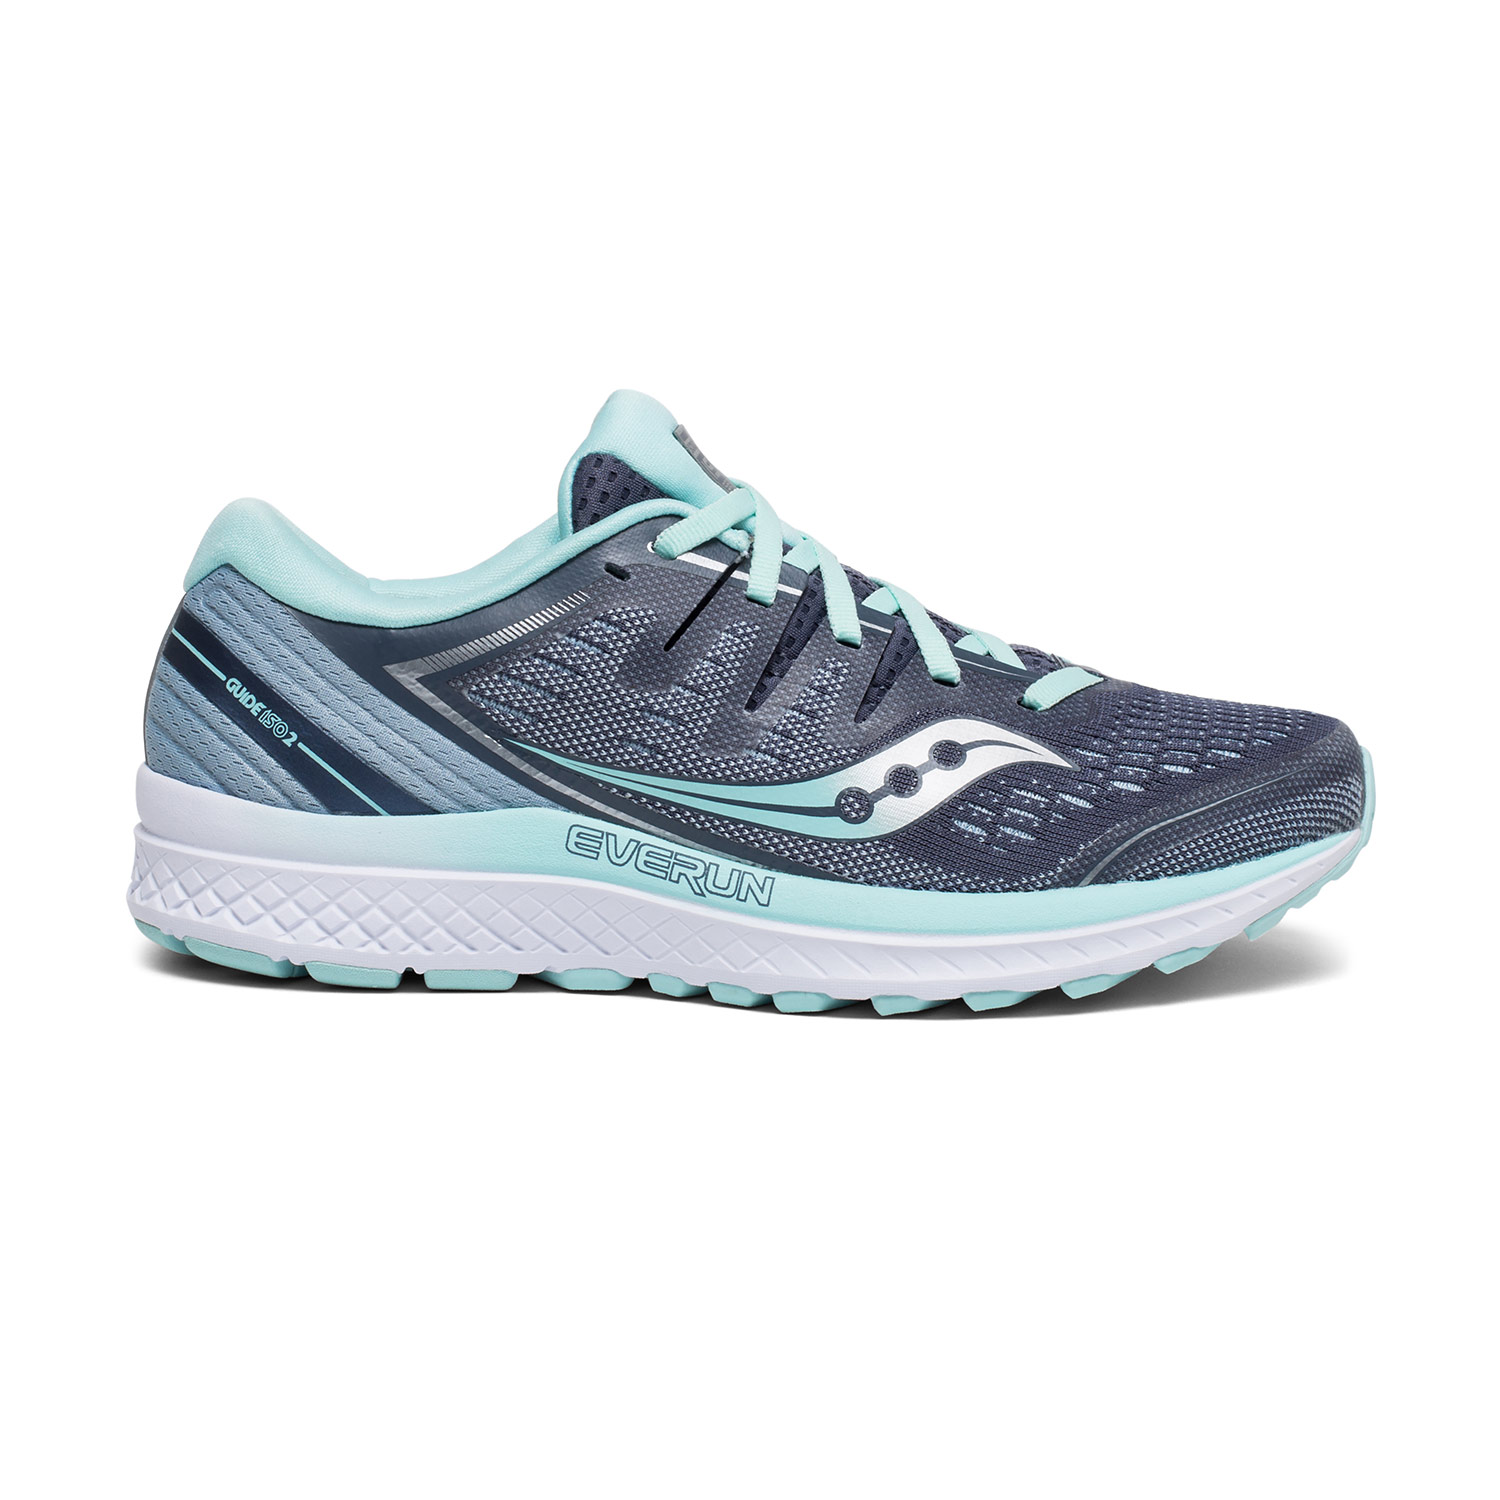 saucony shoes running room